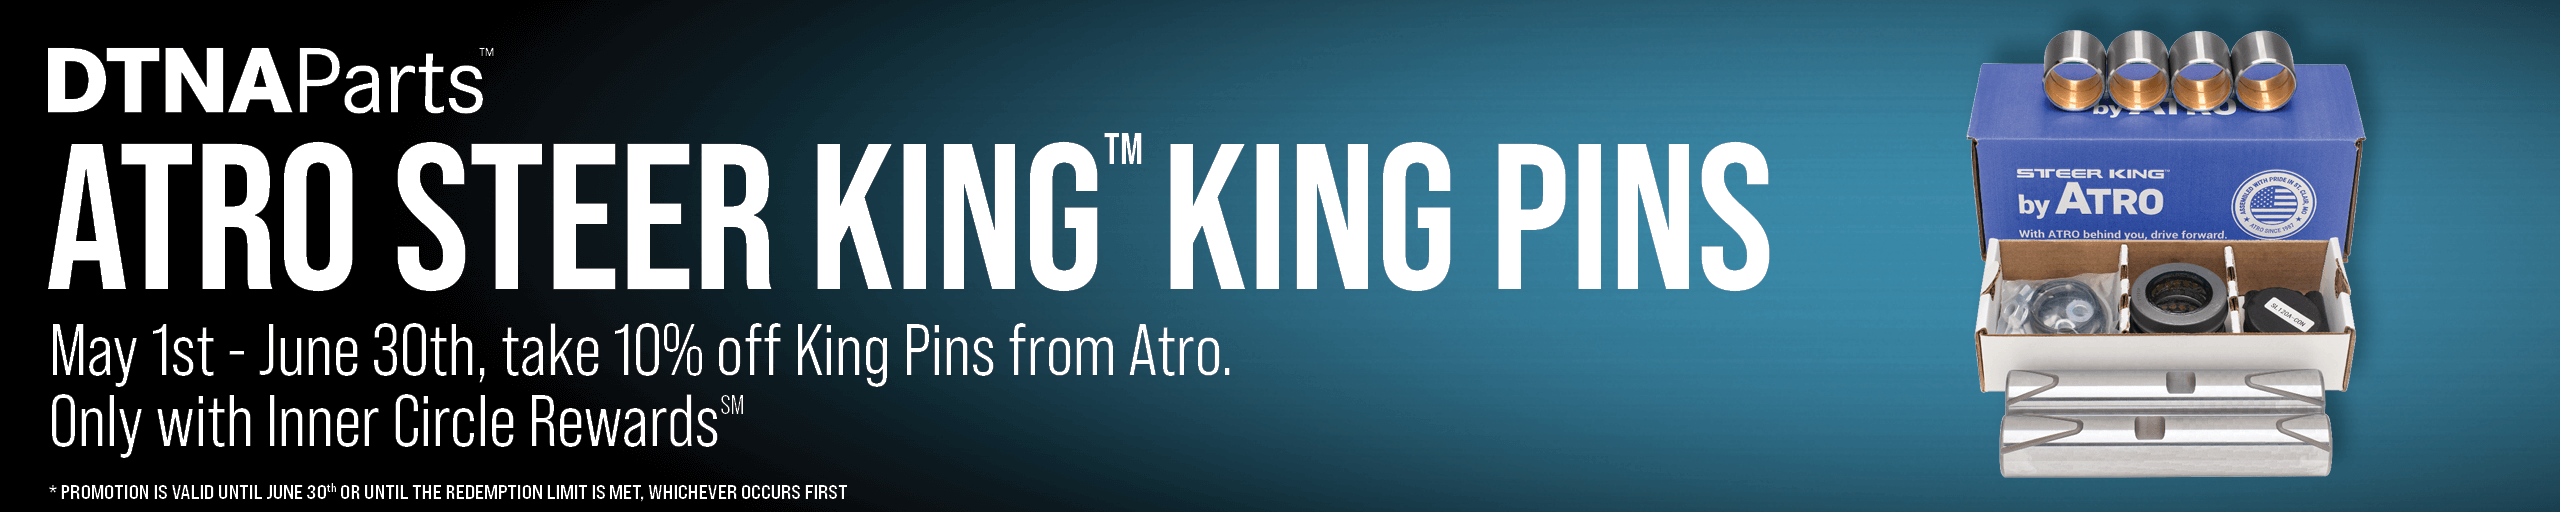 Take 10% off King Pins from ATRO, May 1st - June 30th. Inner Circle Rewards only.